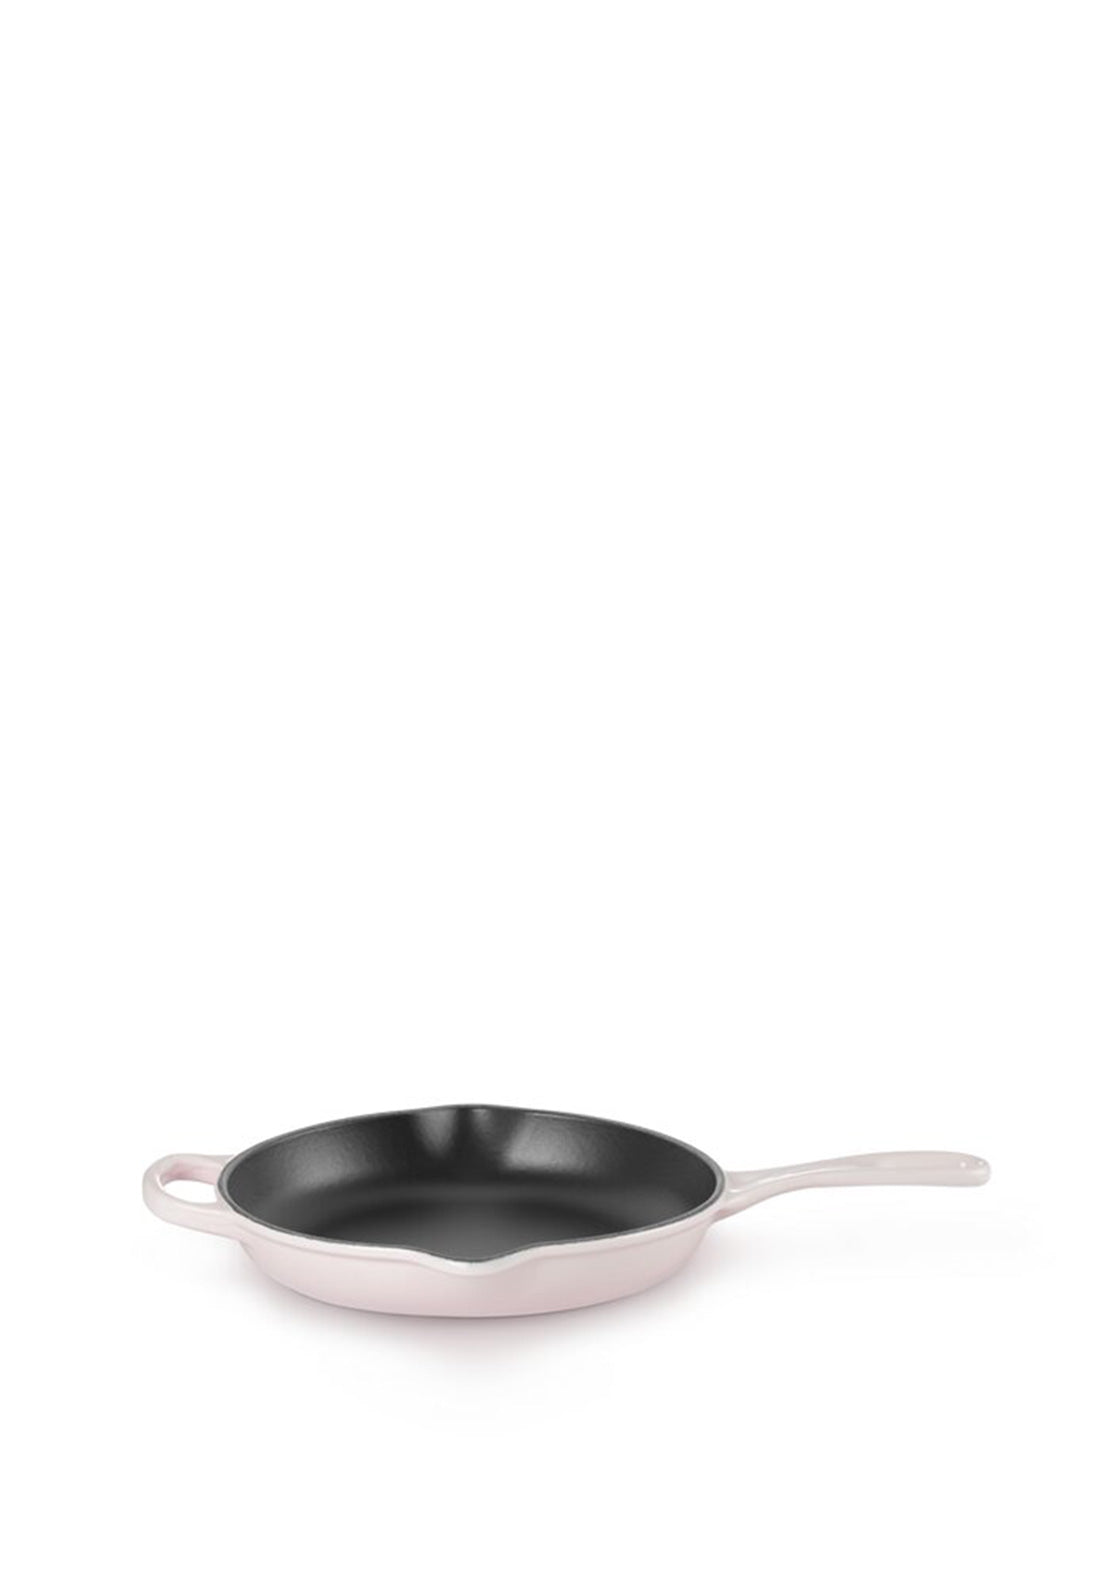 Le Creuset Cast Iron Round Skillet 23 Shell Pink